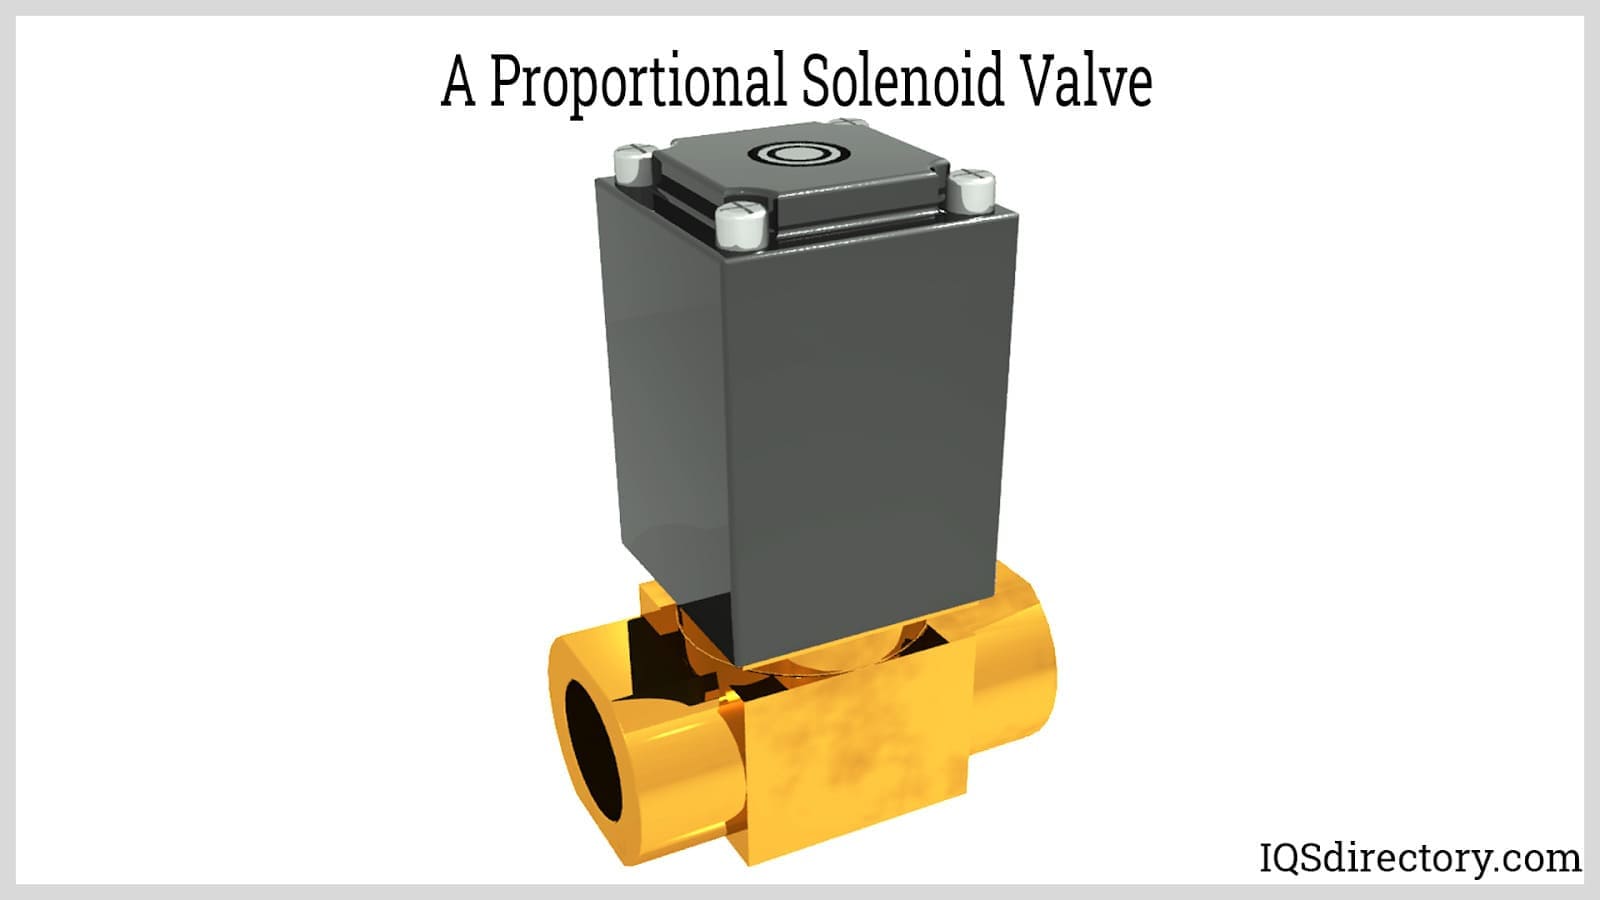 A Proportional Solenoid Valve